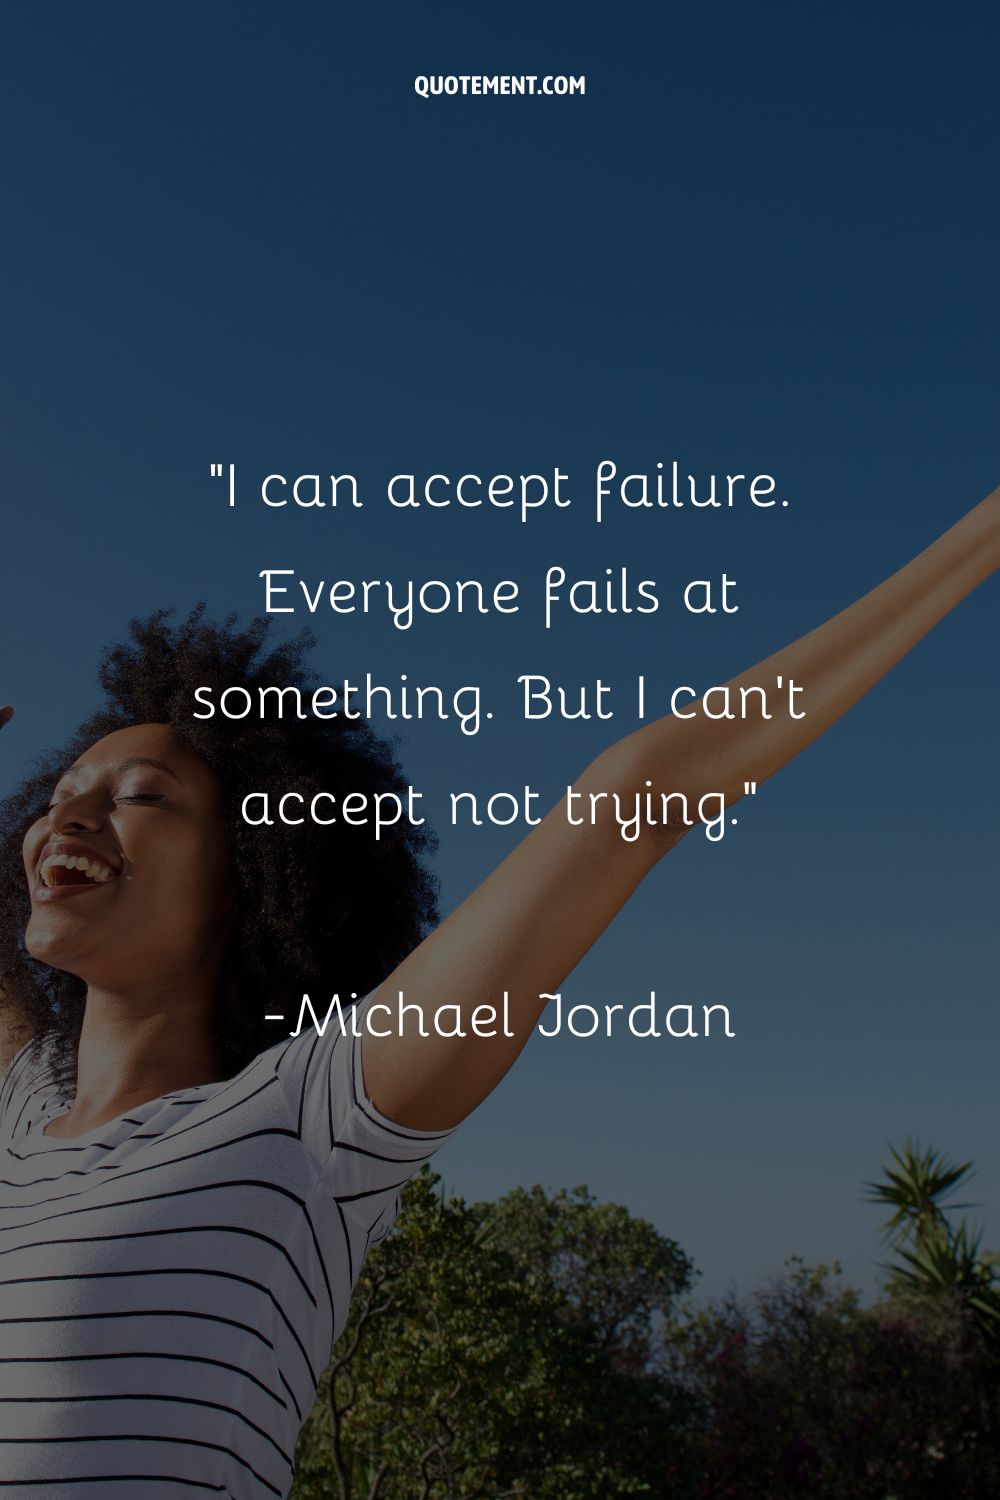 I can accept failure. Everyone fails at something. But I can’t accept not trying